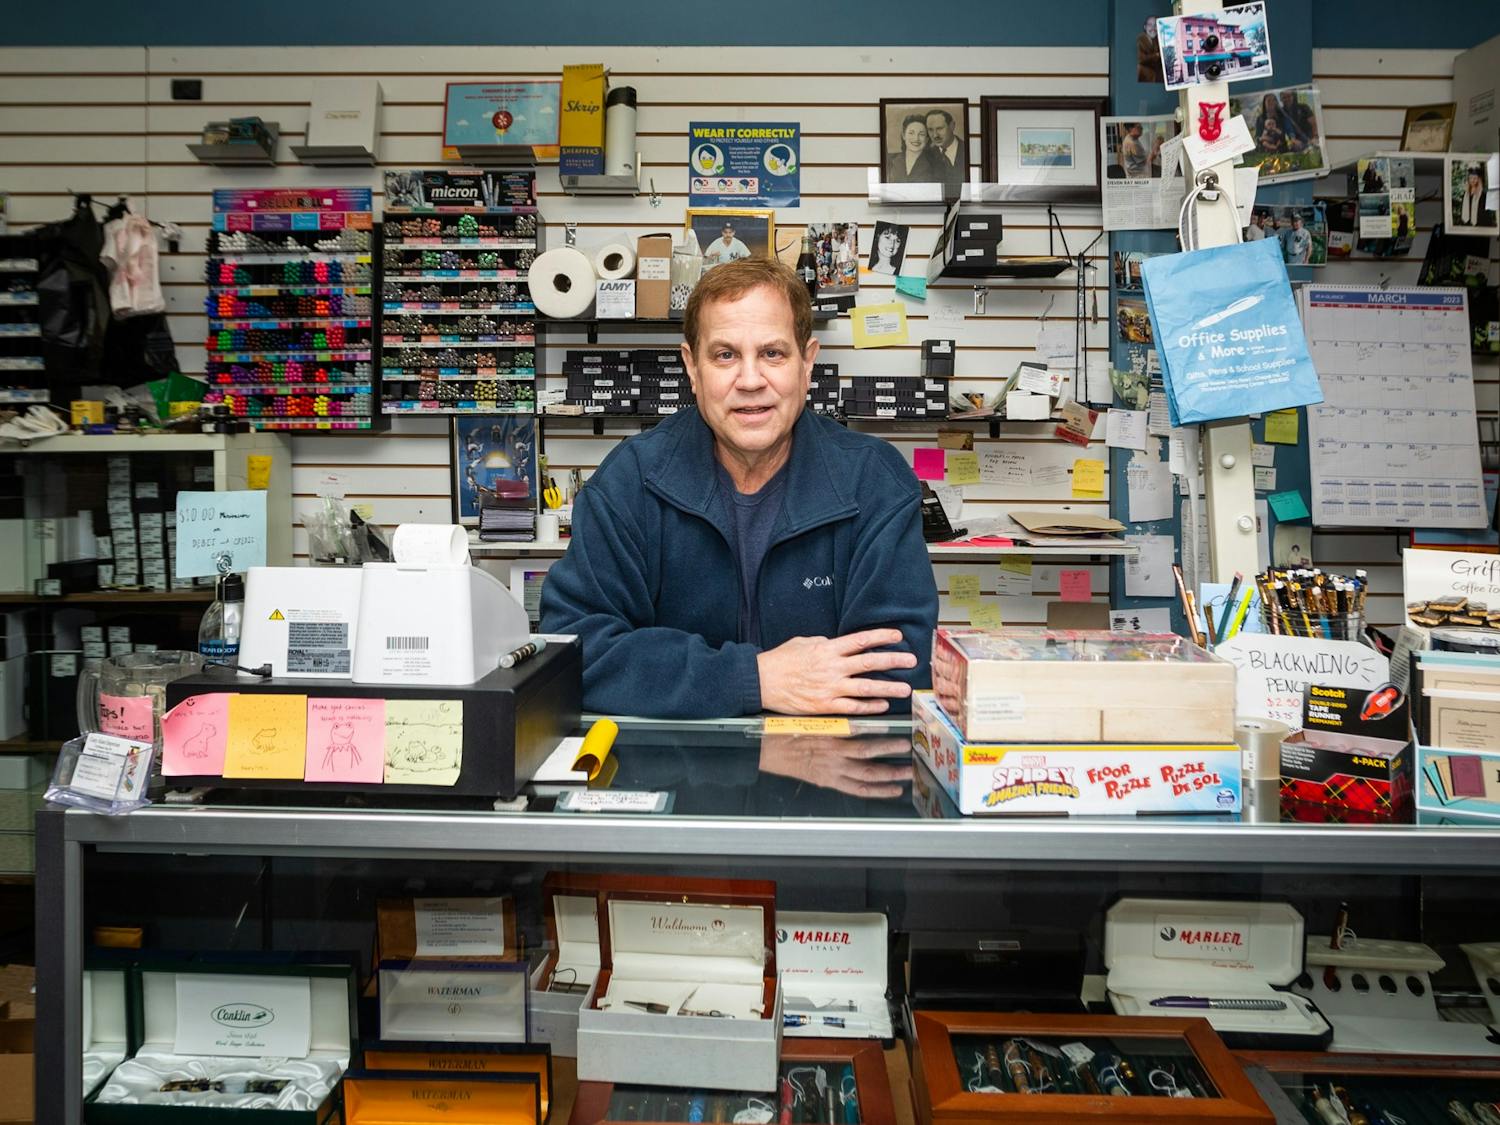 Alan Cohen, owner of Crazy Alan's Emporium, leans on the checkout counter of his store in Chapel Hill, N.C., on Wednesday, March 15, 2023. Crazy Alan's Emporium is an office supplies store that has been in business for over 20 years.